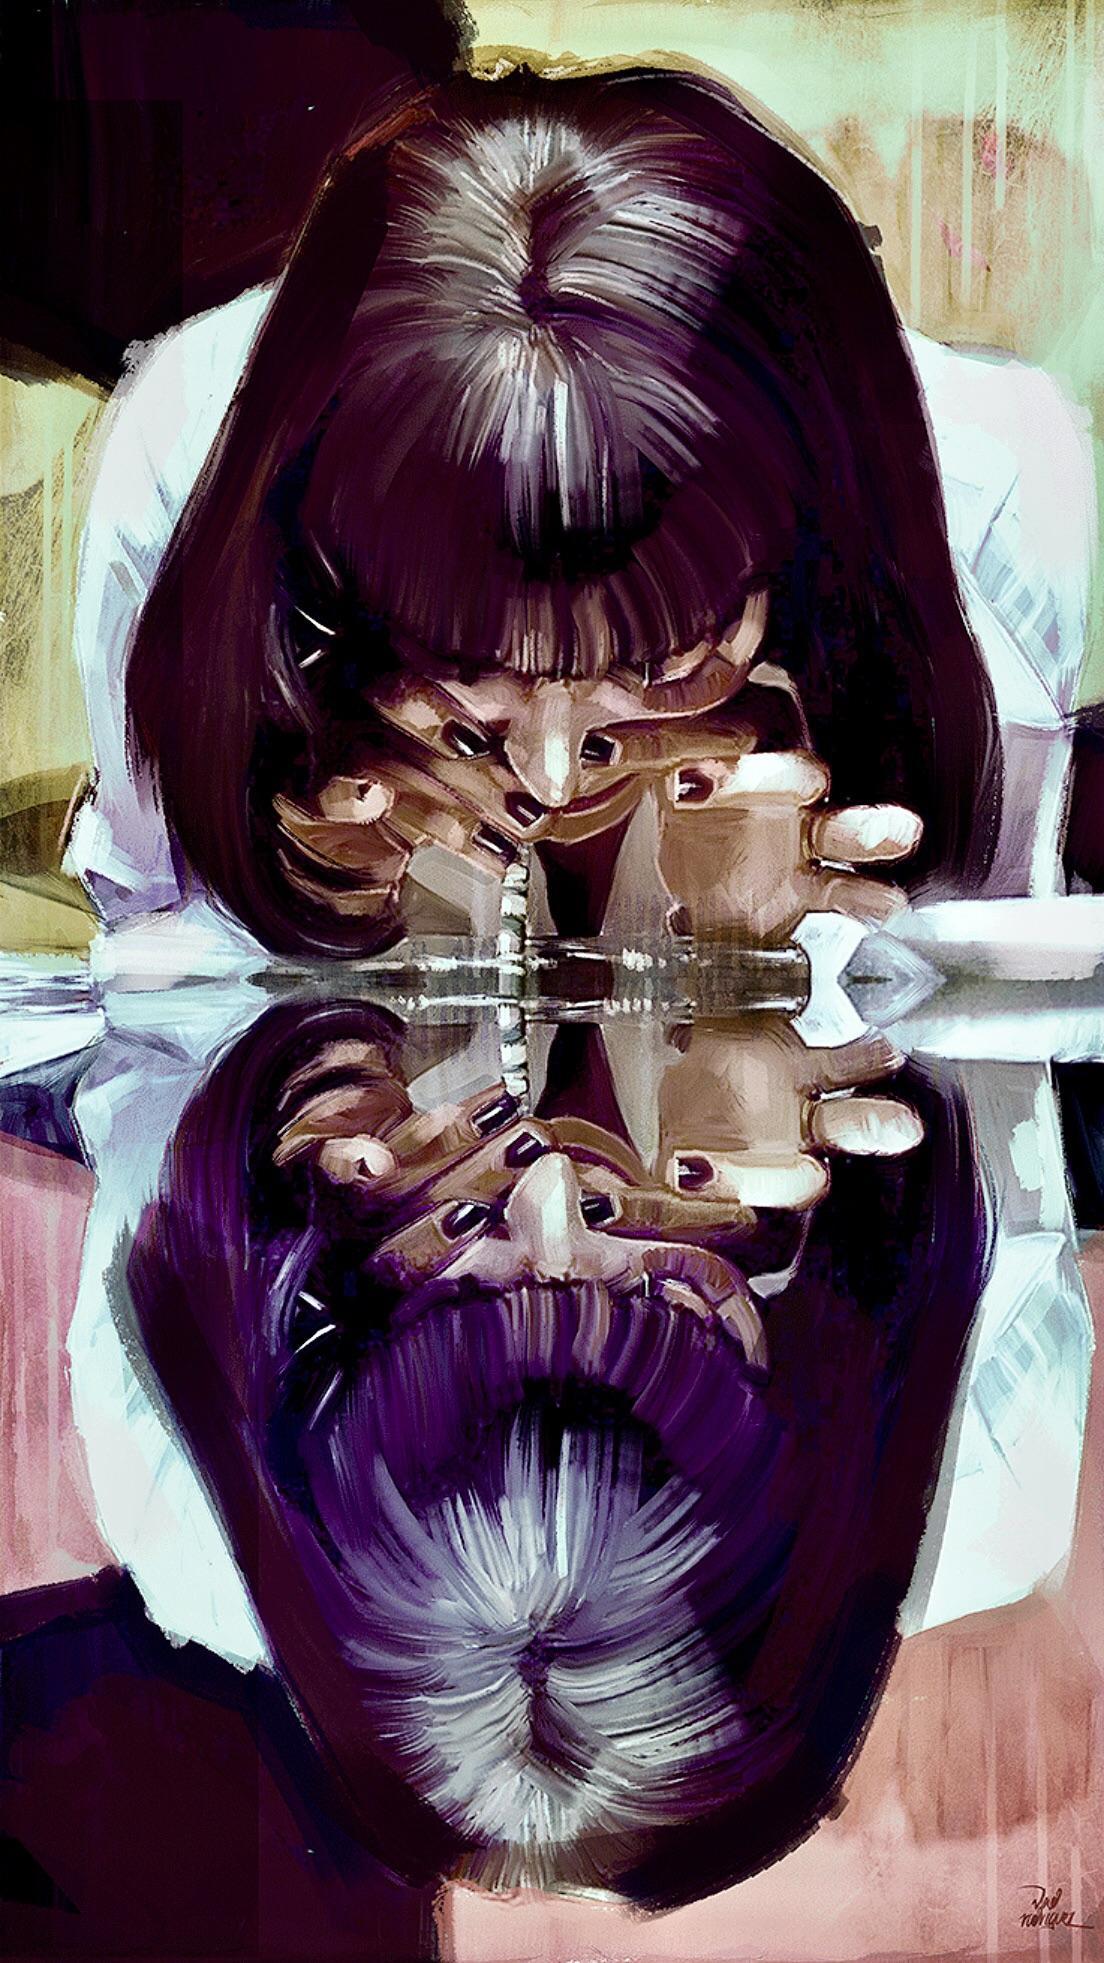 Mia Wallace Pulp Fiction Movie Artwork Sony Xperia iPhone Wallpapers  Free Download